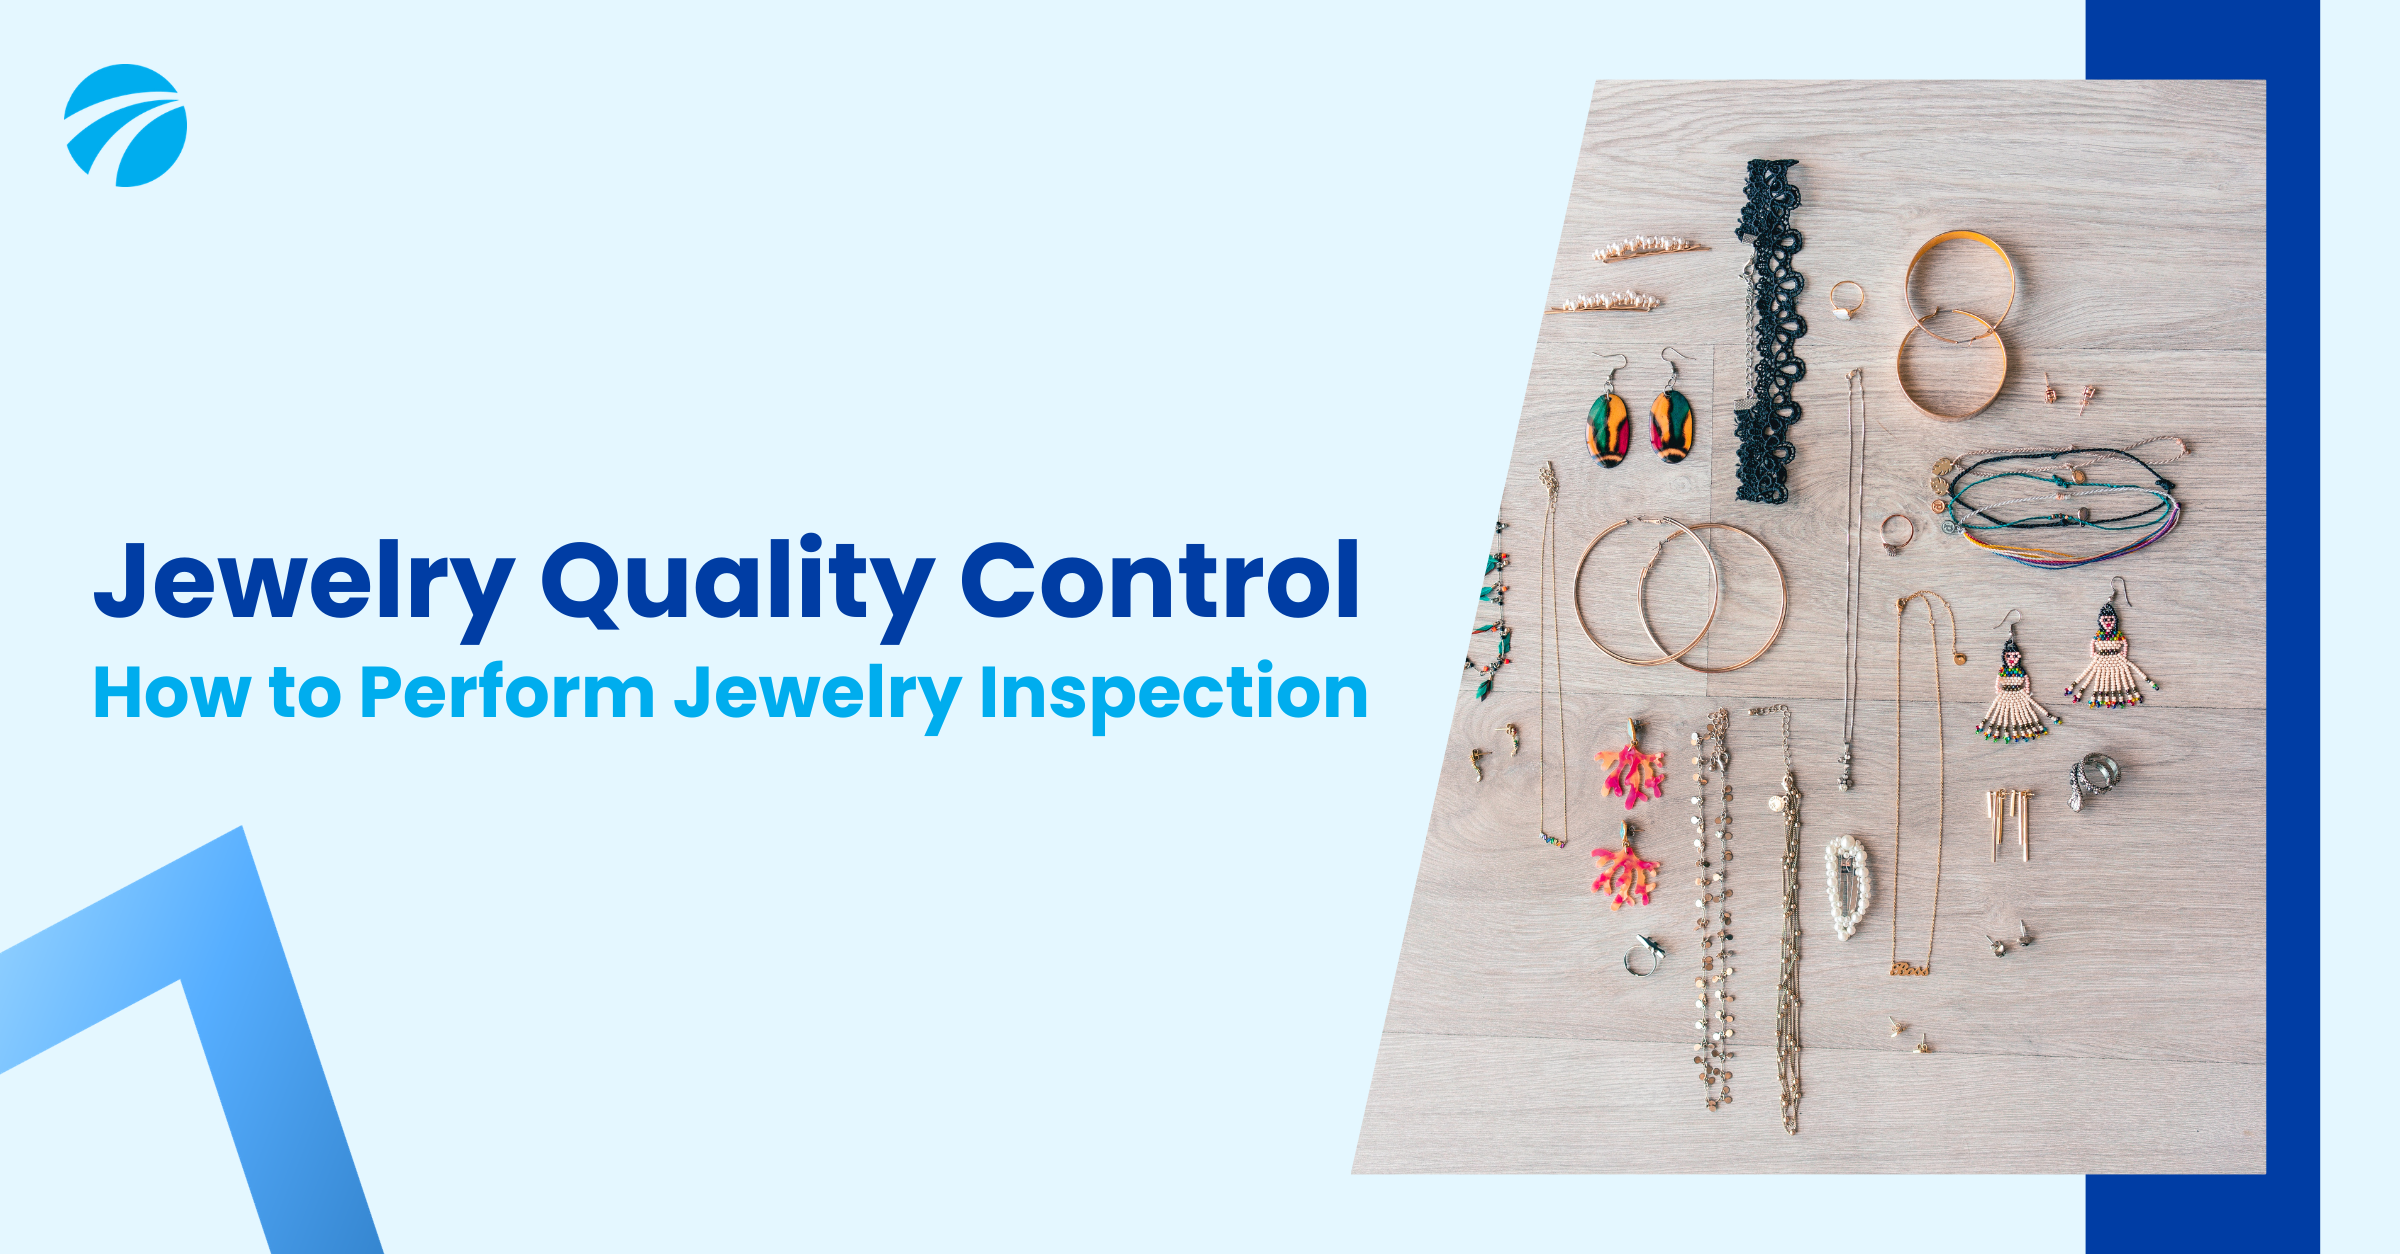 Jewelry Quality Control How to Perform Jewelry Inspection